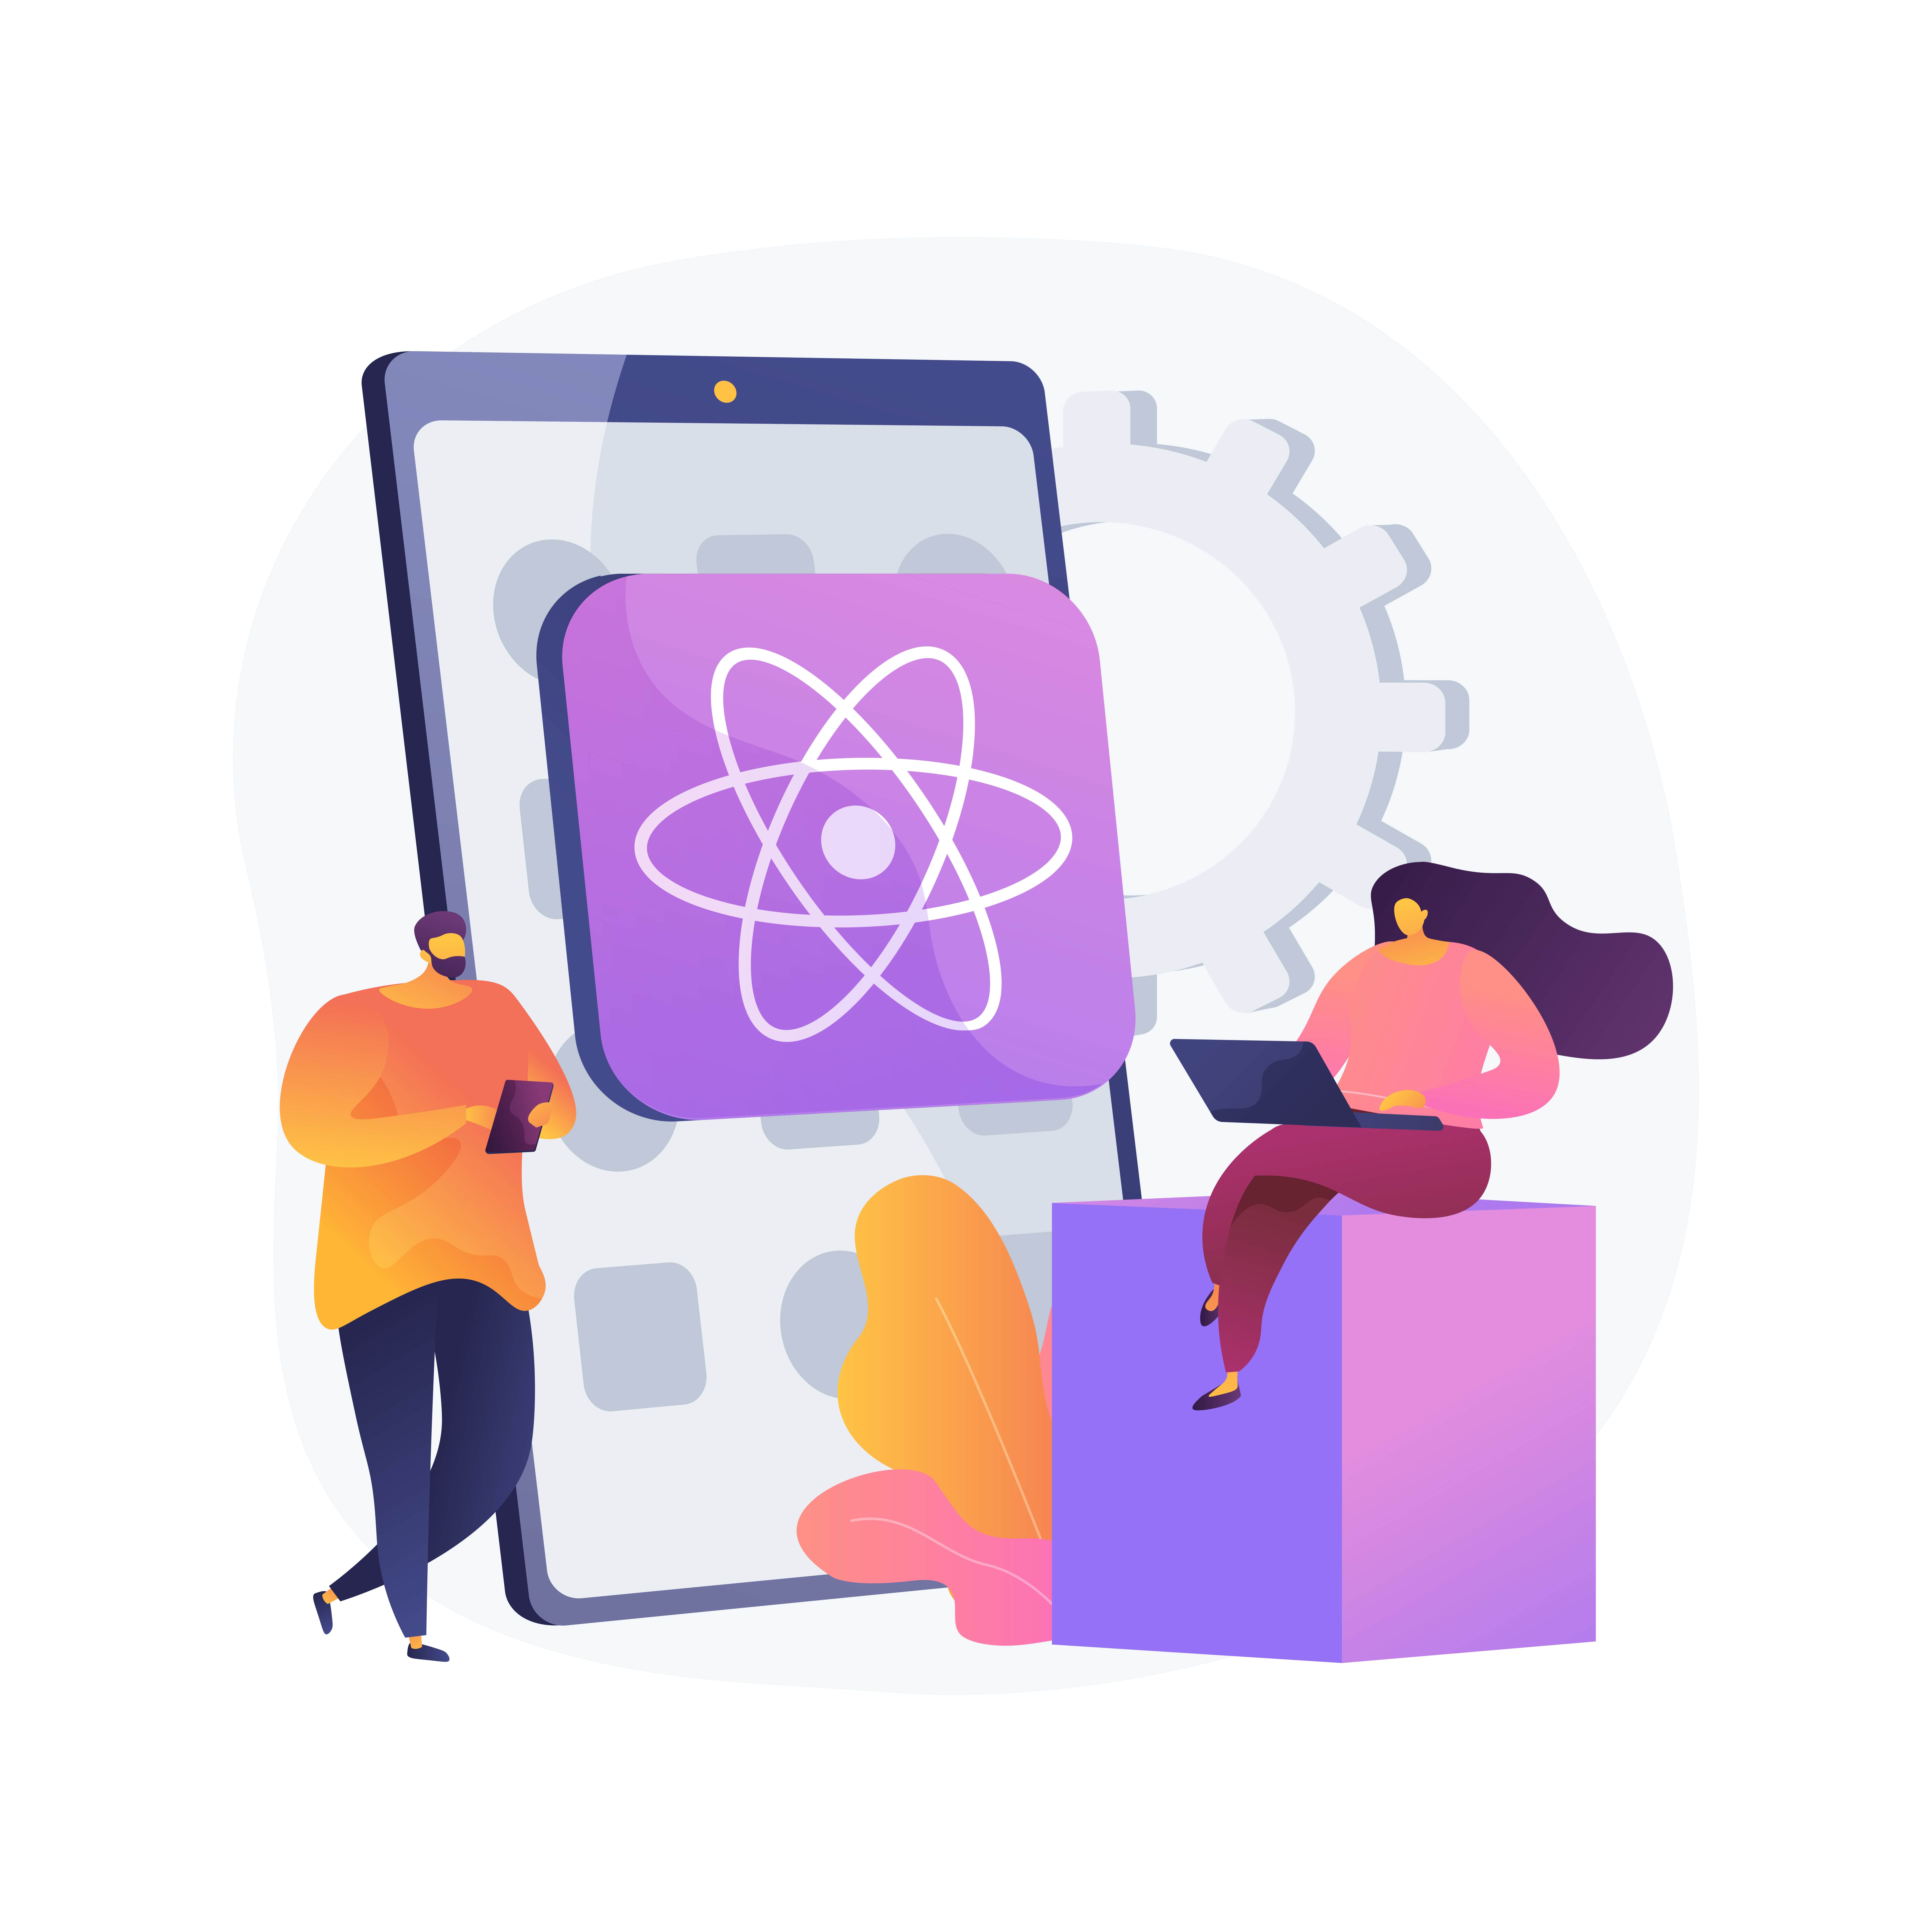 What is react JS used for?